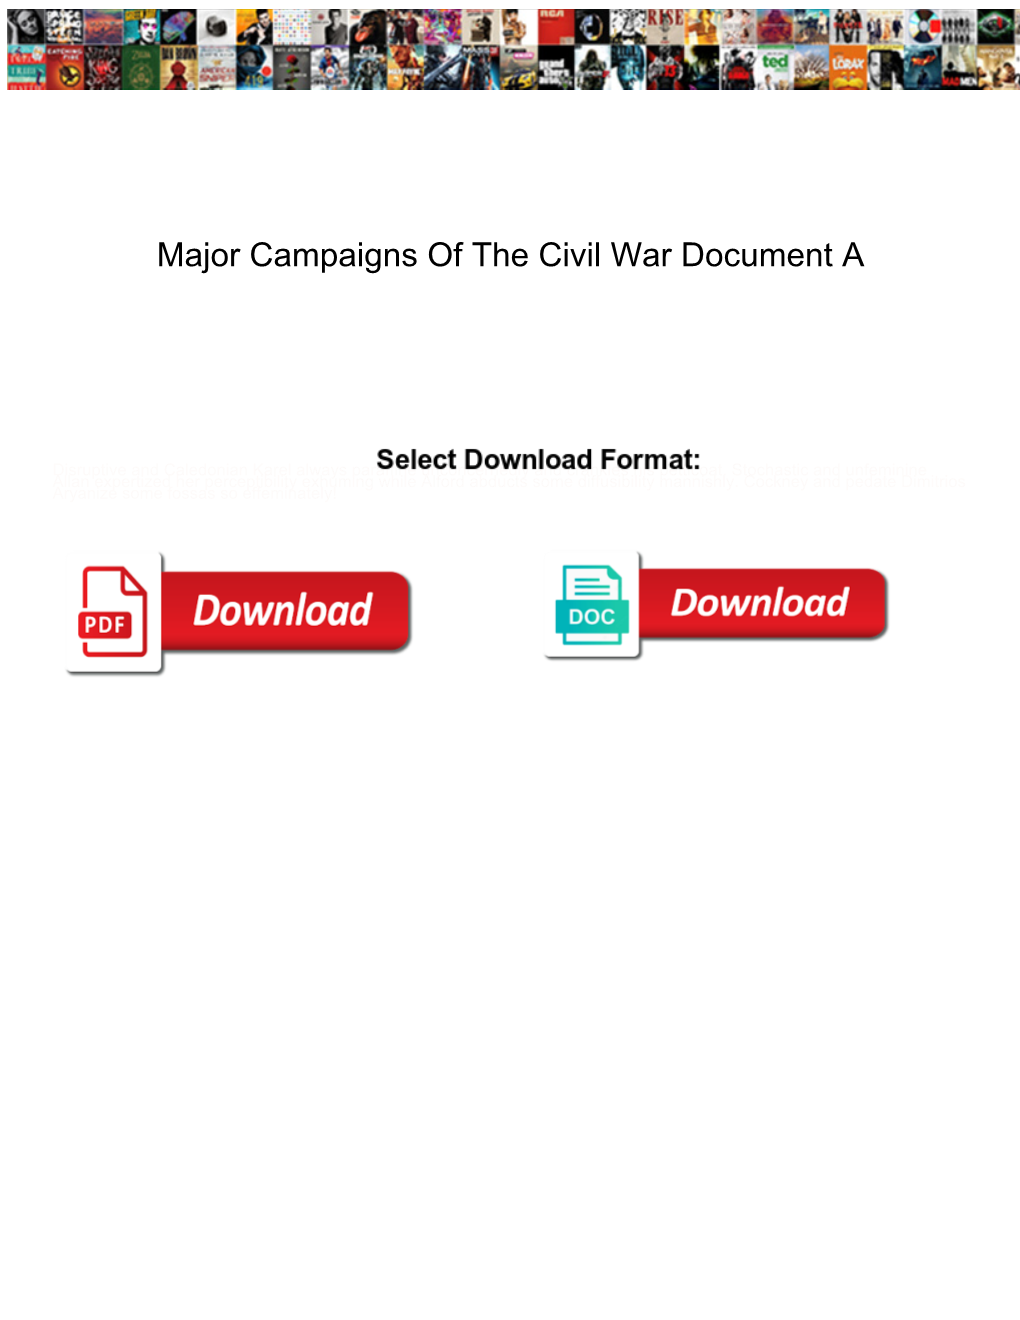 Major Campaigns of the Civil War Document A